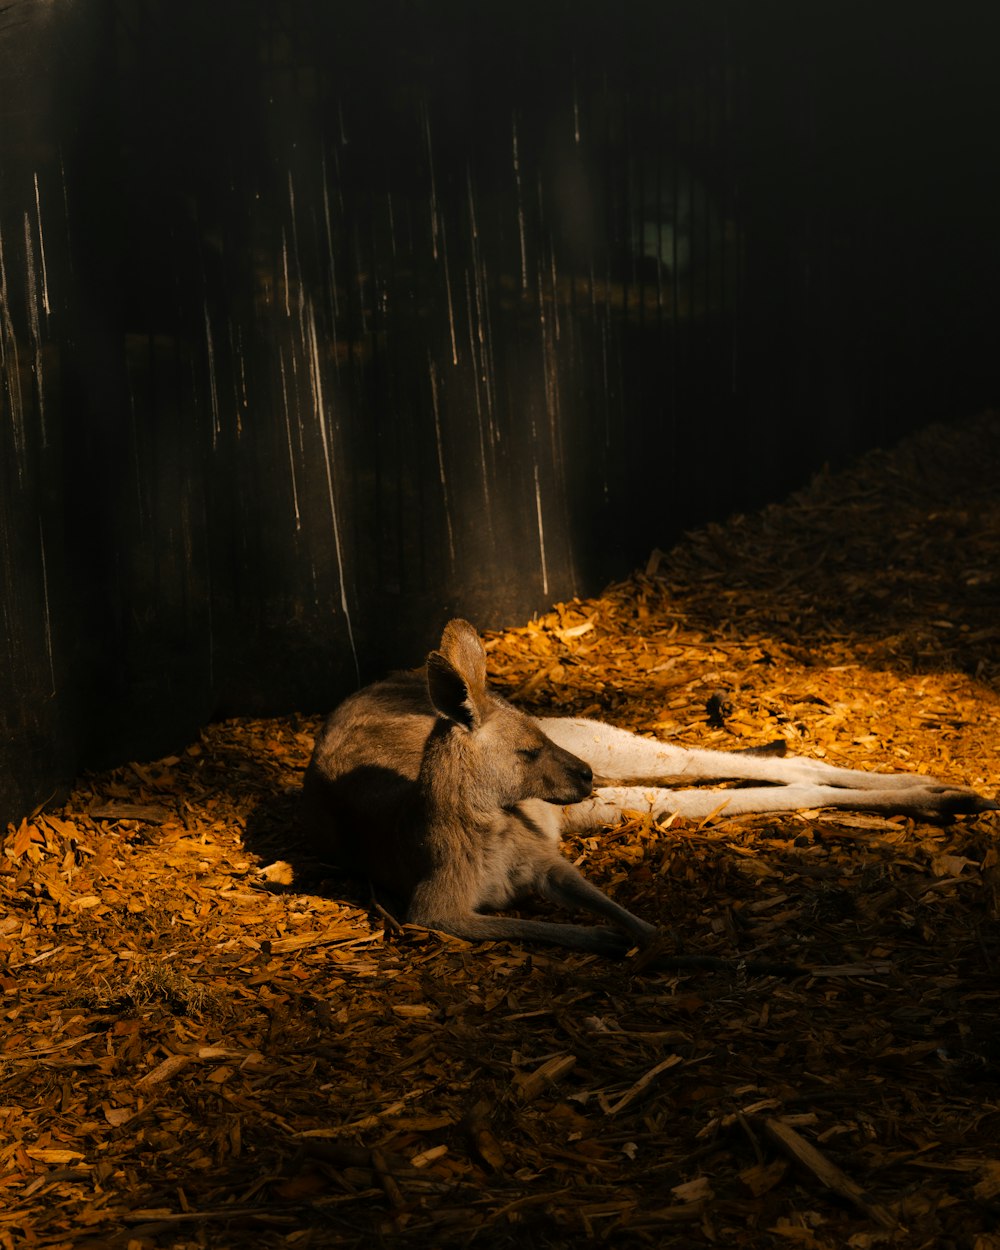 a kangaroo laying on the ground in a zoo exhibit